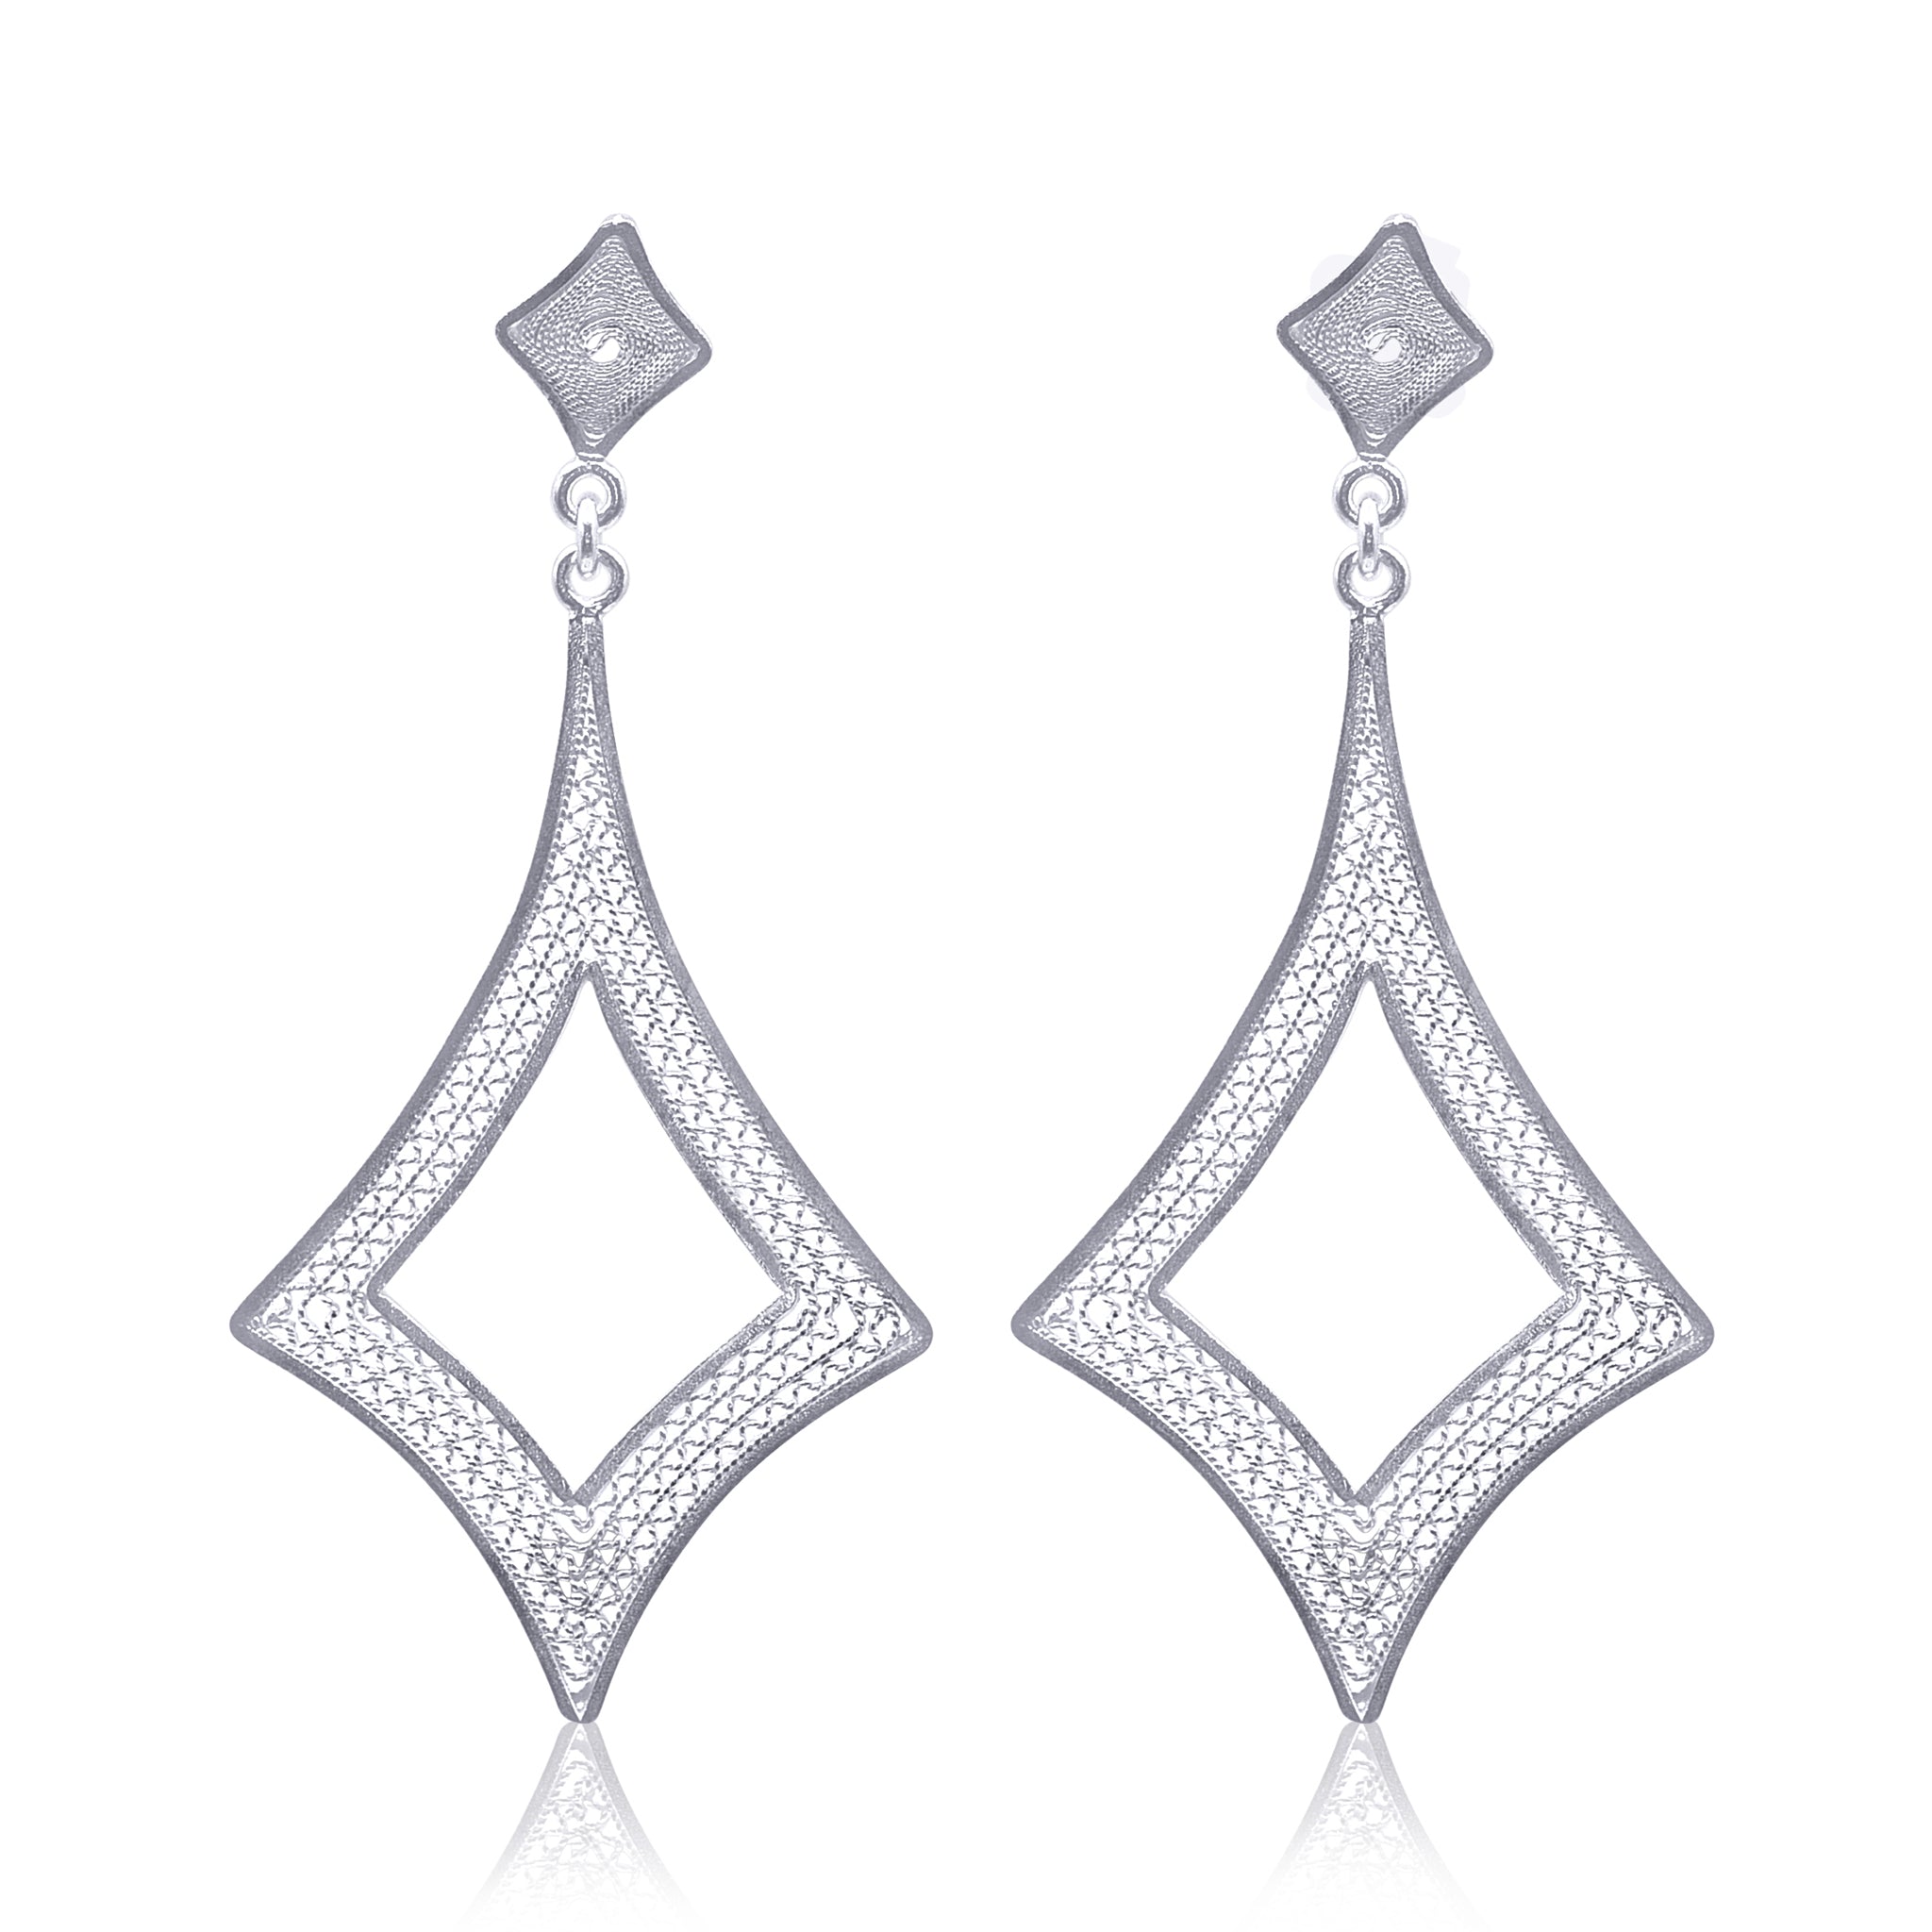 CLAIRE MEDIUM EARRINGS FILIGREE SILVER & GOLD - Olmox